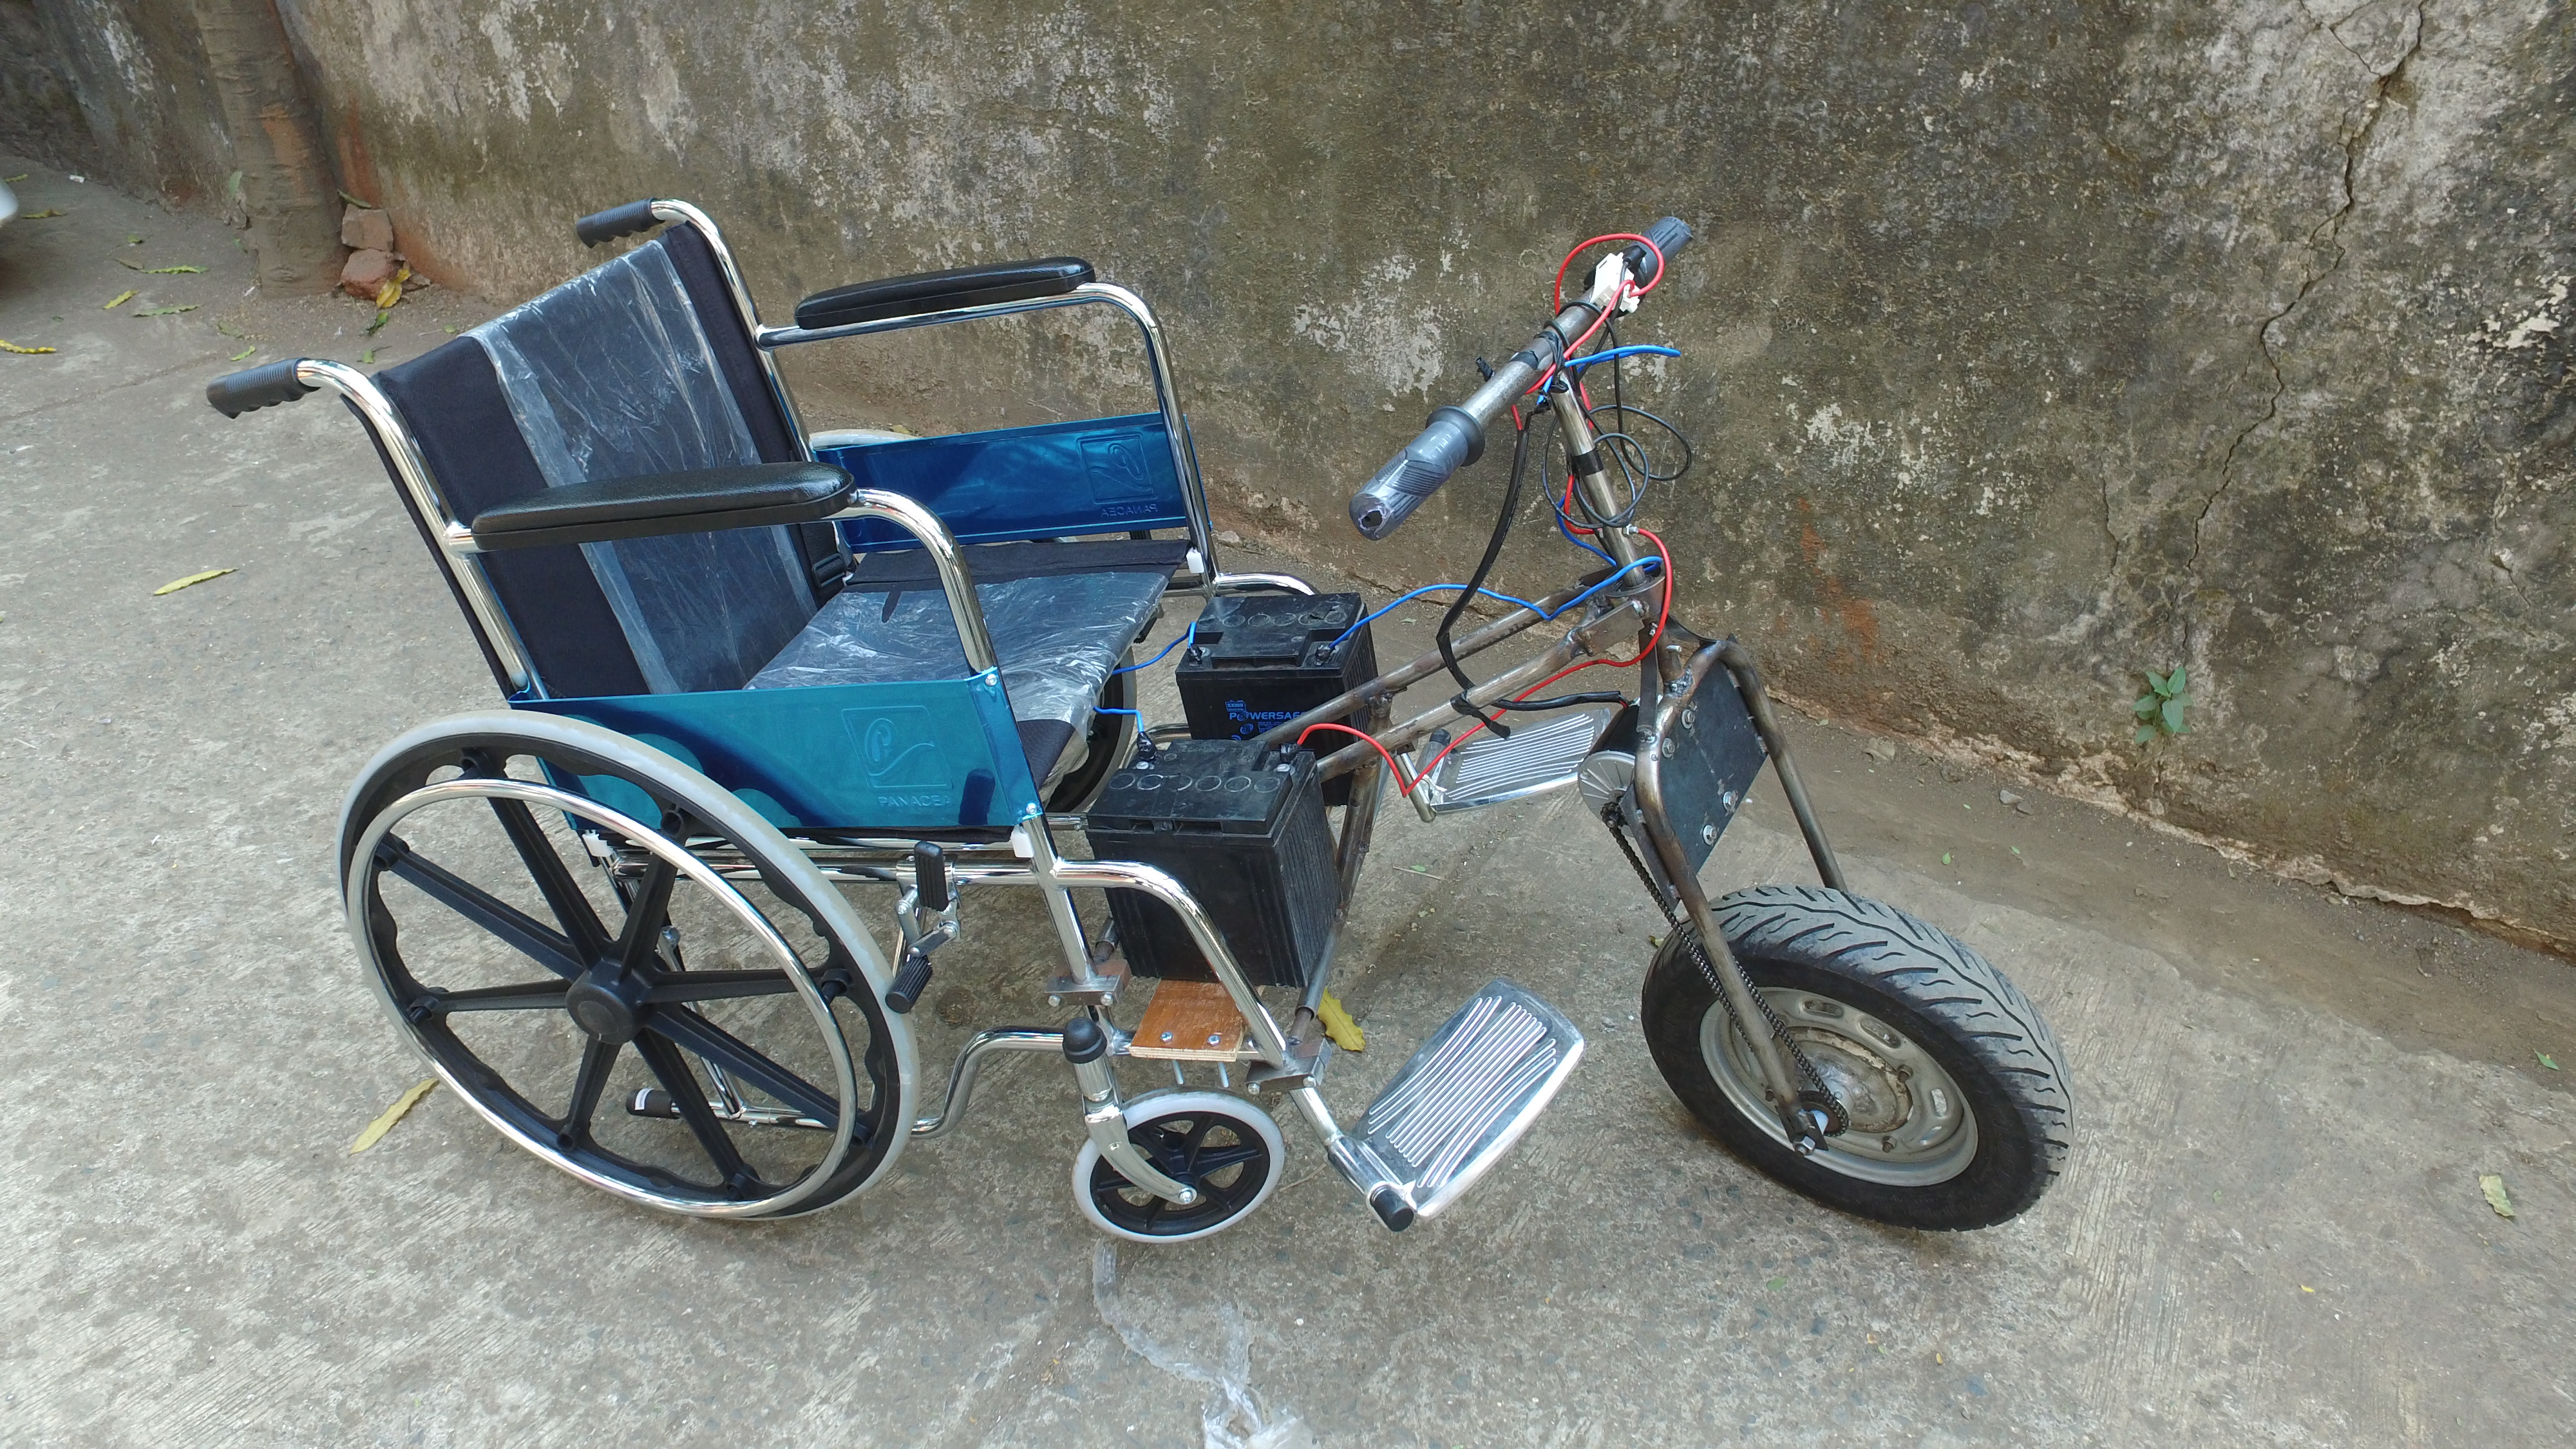 Design & Fabrication of Attachable Wheelchair Automator | NevonProjects